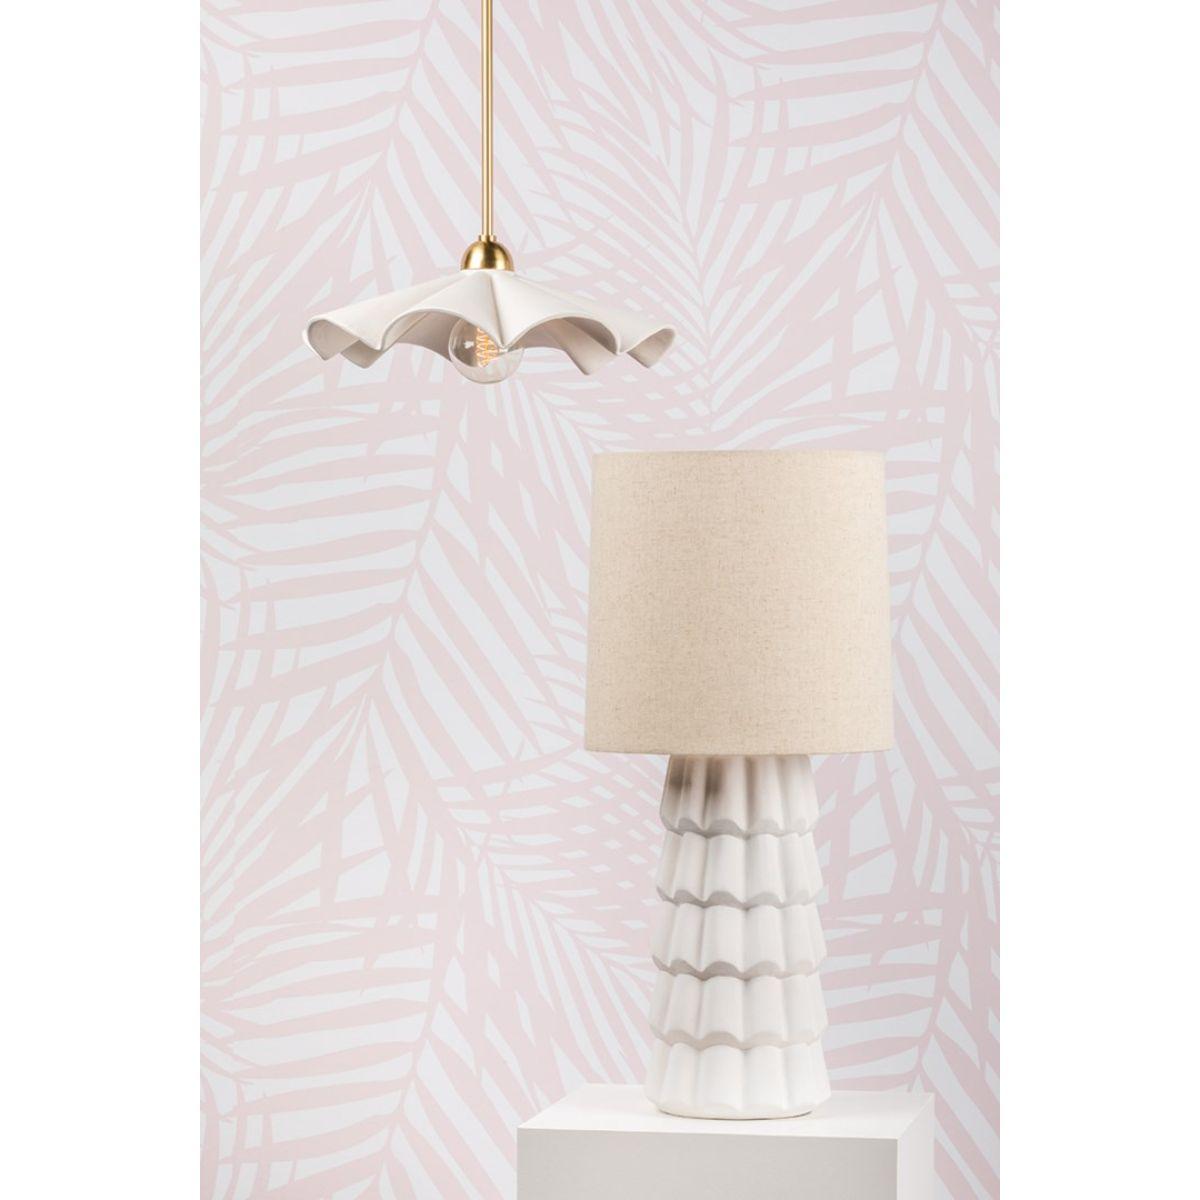 Maisie Table Lamp Ceramic Rough Texture White with Aged Brass Accents